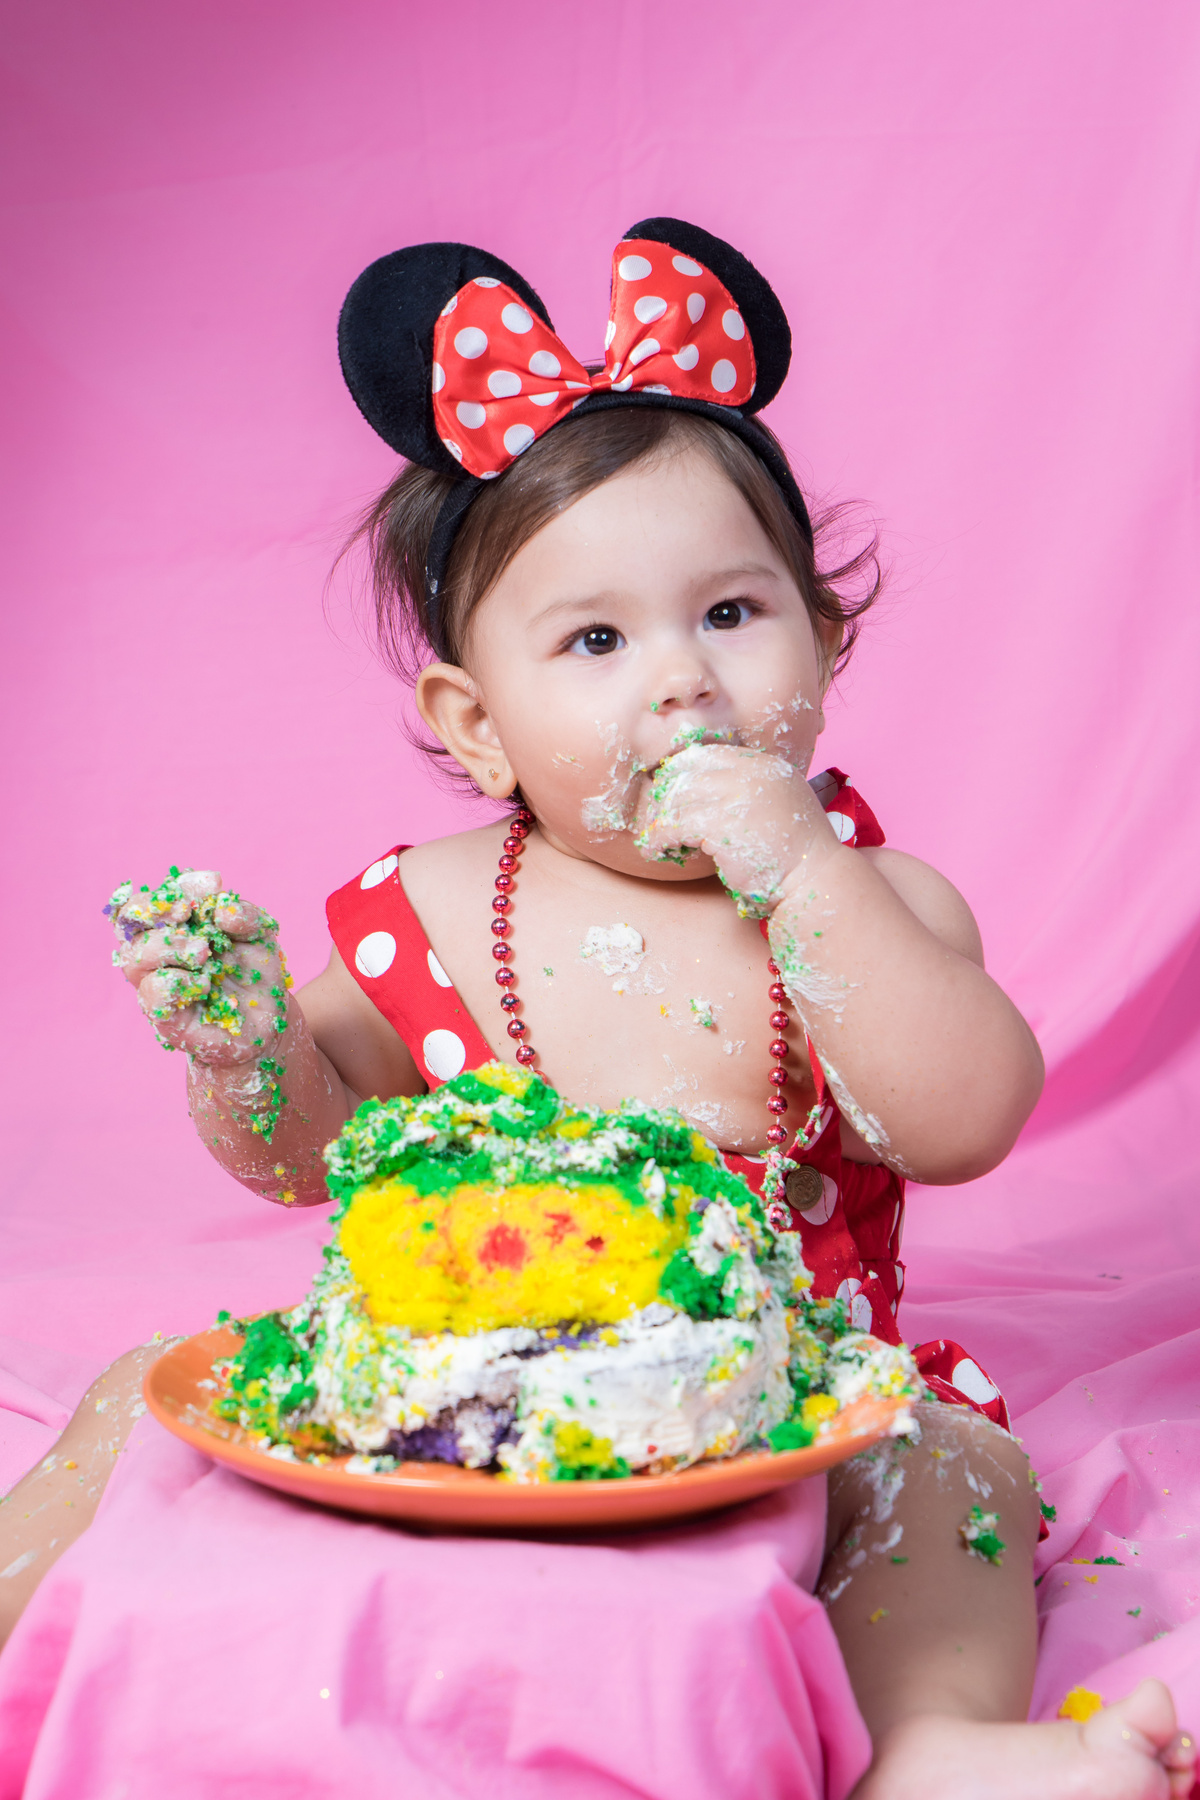 A Baby Eating Cake